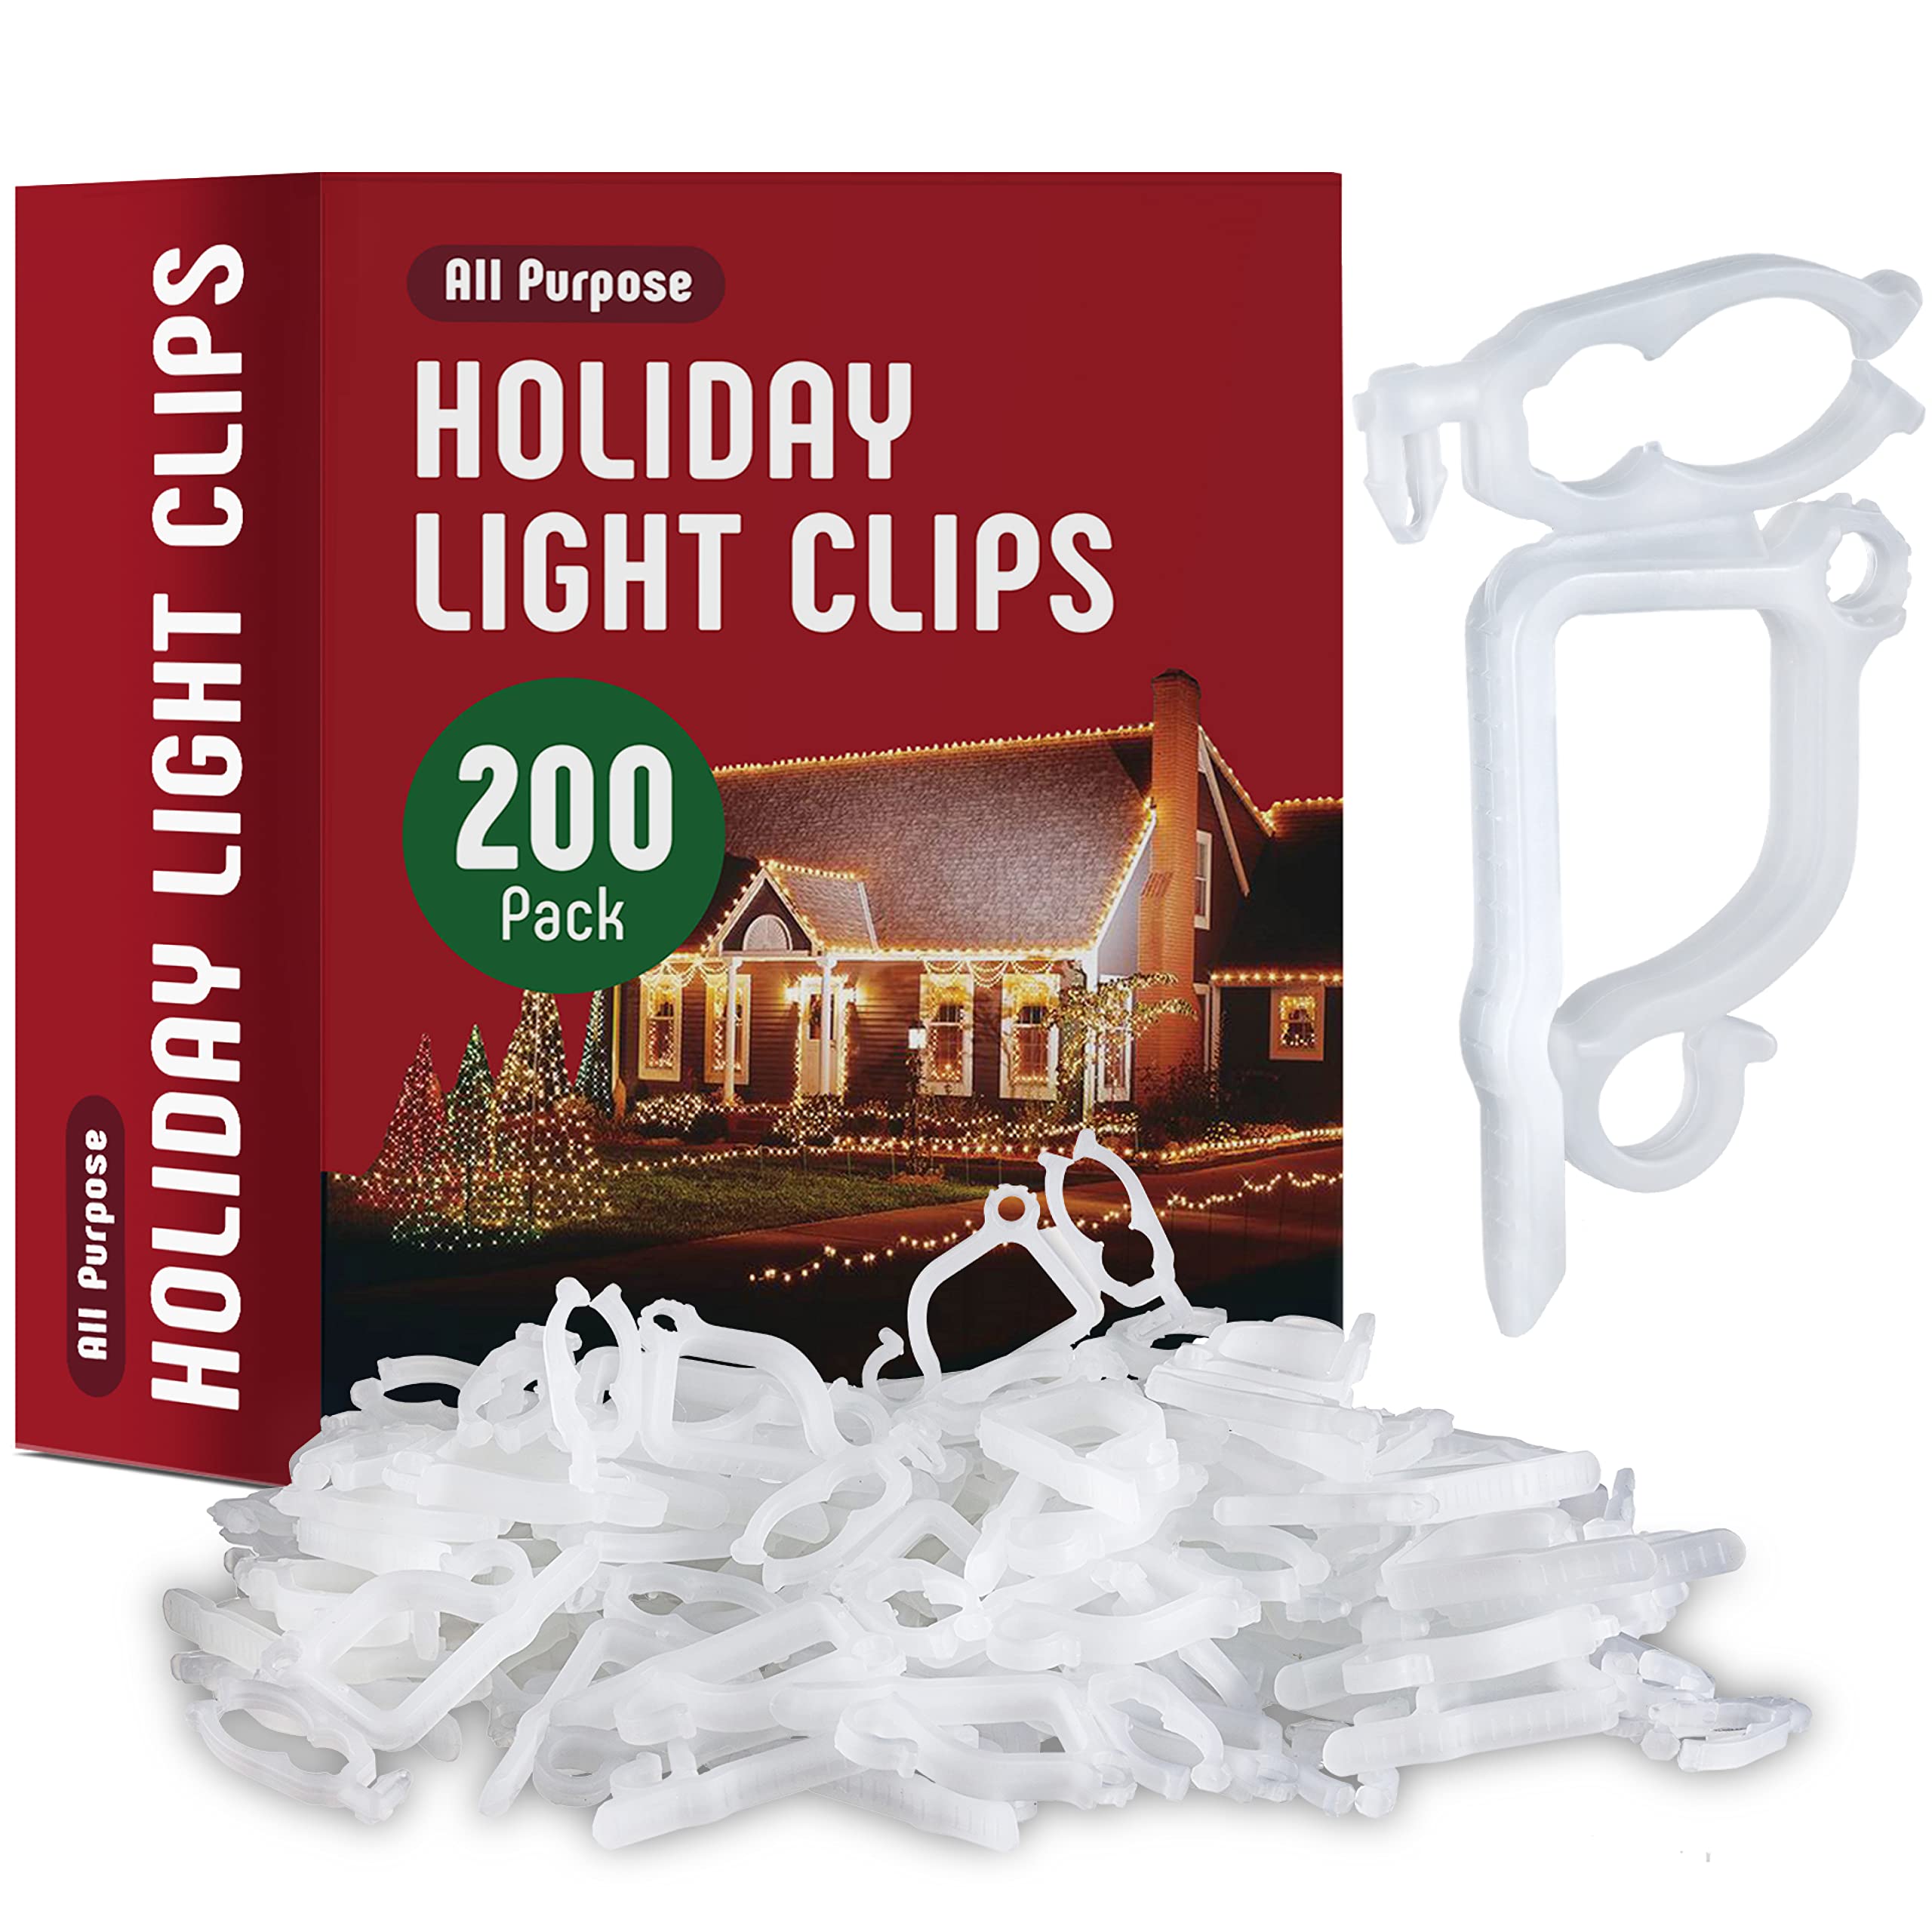 All-Purpose Holiday Light Clips [Set of 200] Christmas Light Clips, Outdoor Light Clips - Mount to Shingles & gutters - Works with Mini, C6, C7, C9, Rope, Icicle Lights - No Tools Required - USA Made  - Like New